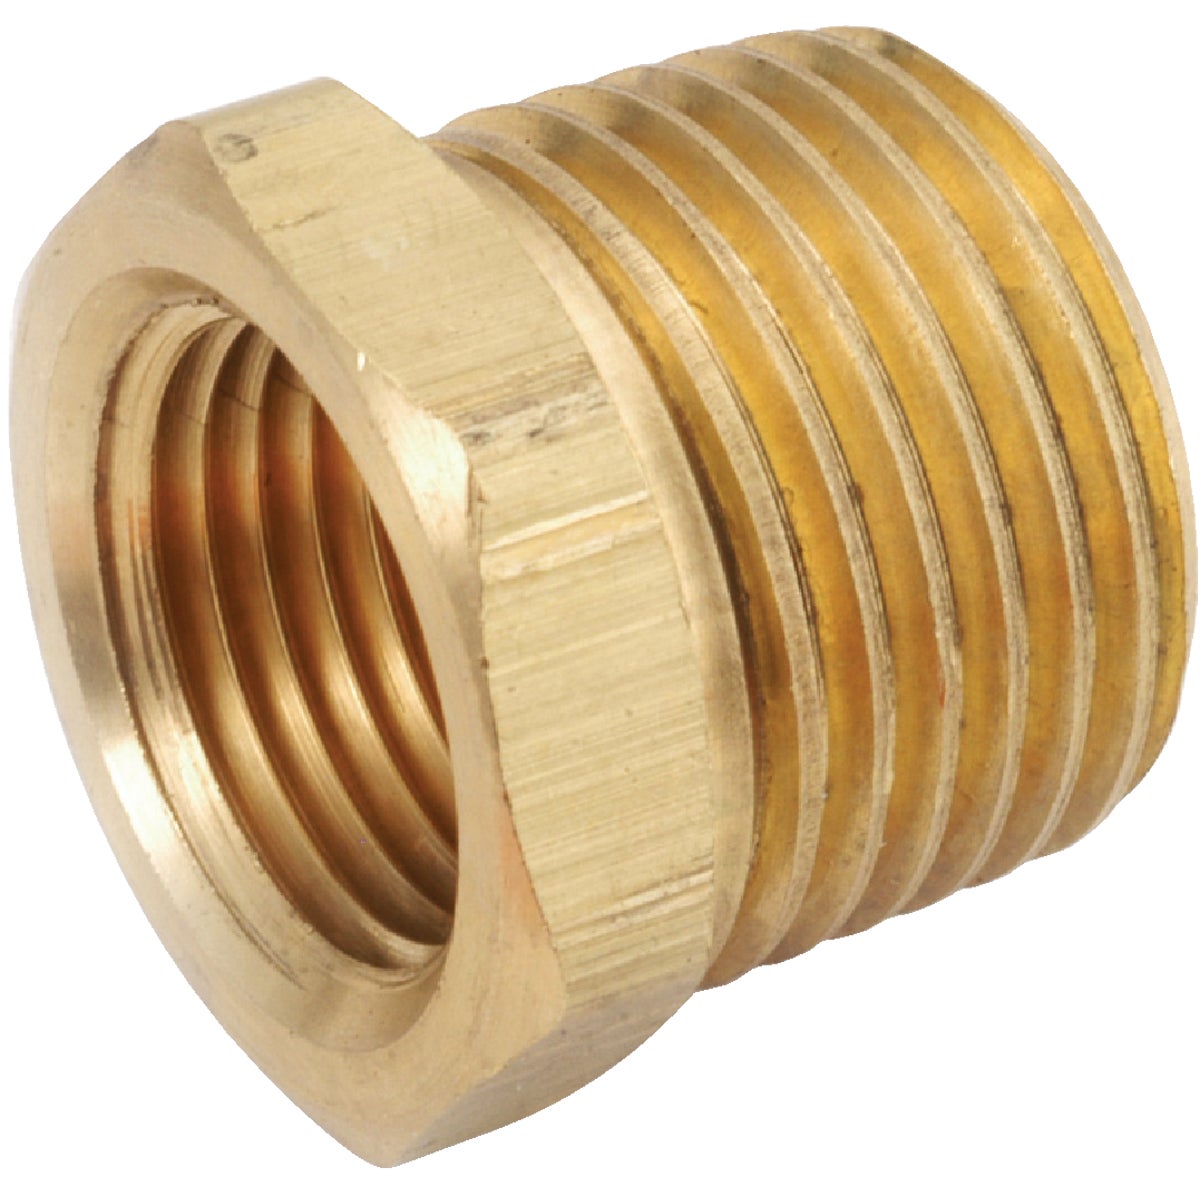 Anderson Metals 1/2 In. MPT x 1/8 FPT In. Yellow Brass Hex Reducing Bushing